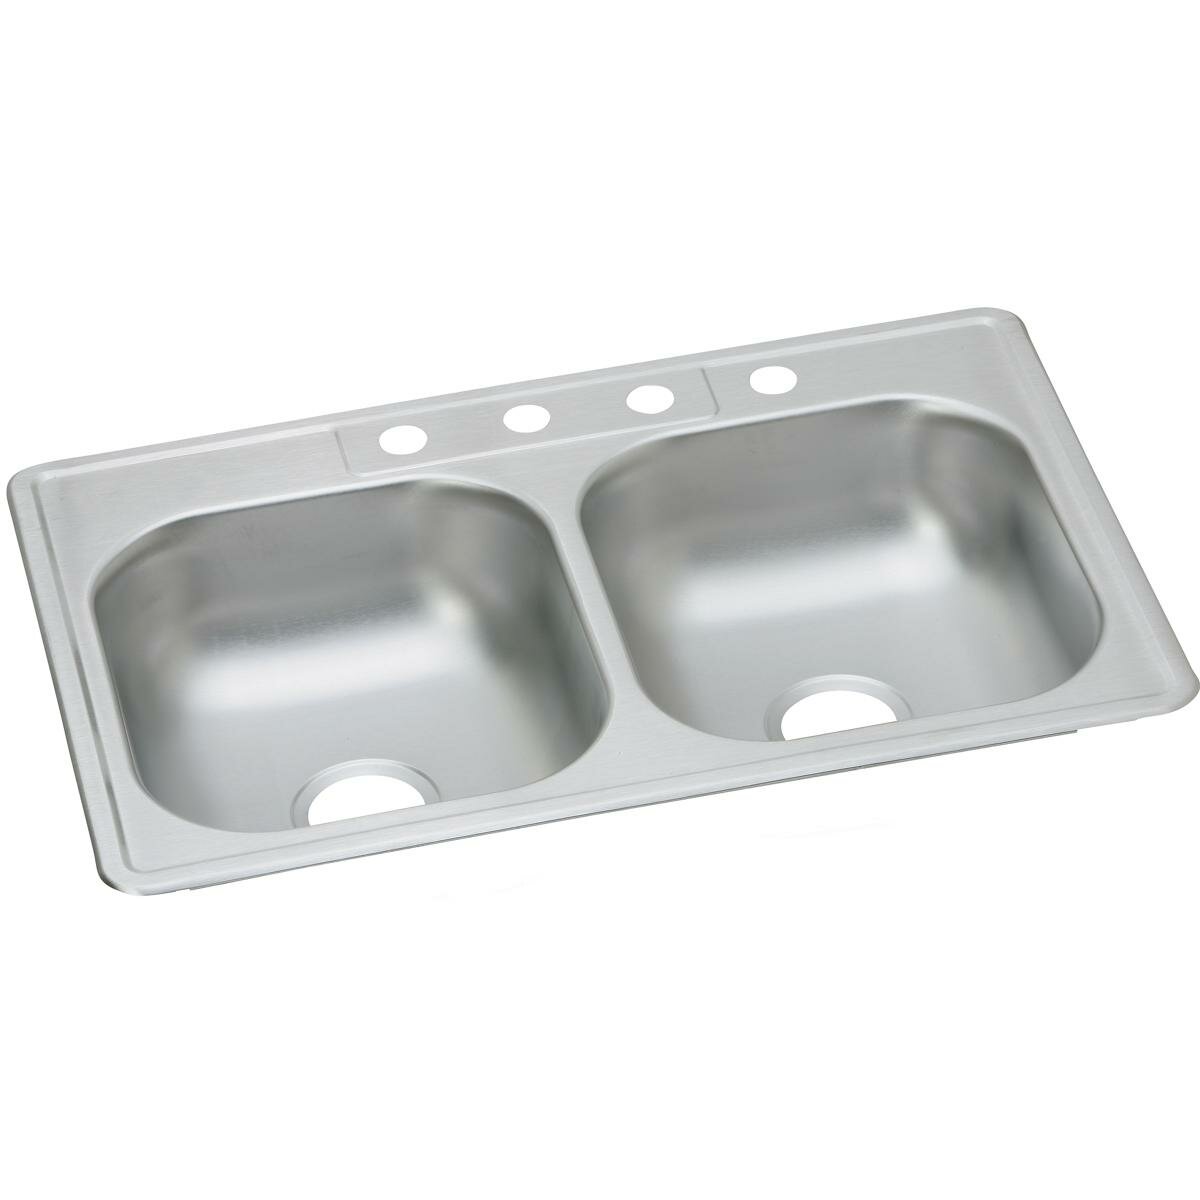 Naiture Stainless Steel Drop-in Bar Sink in 2 Size